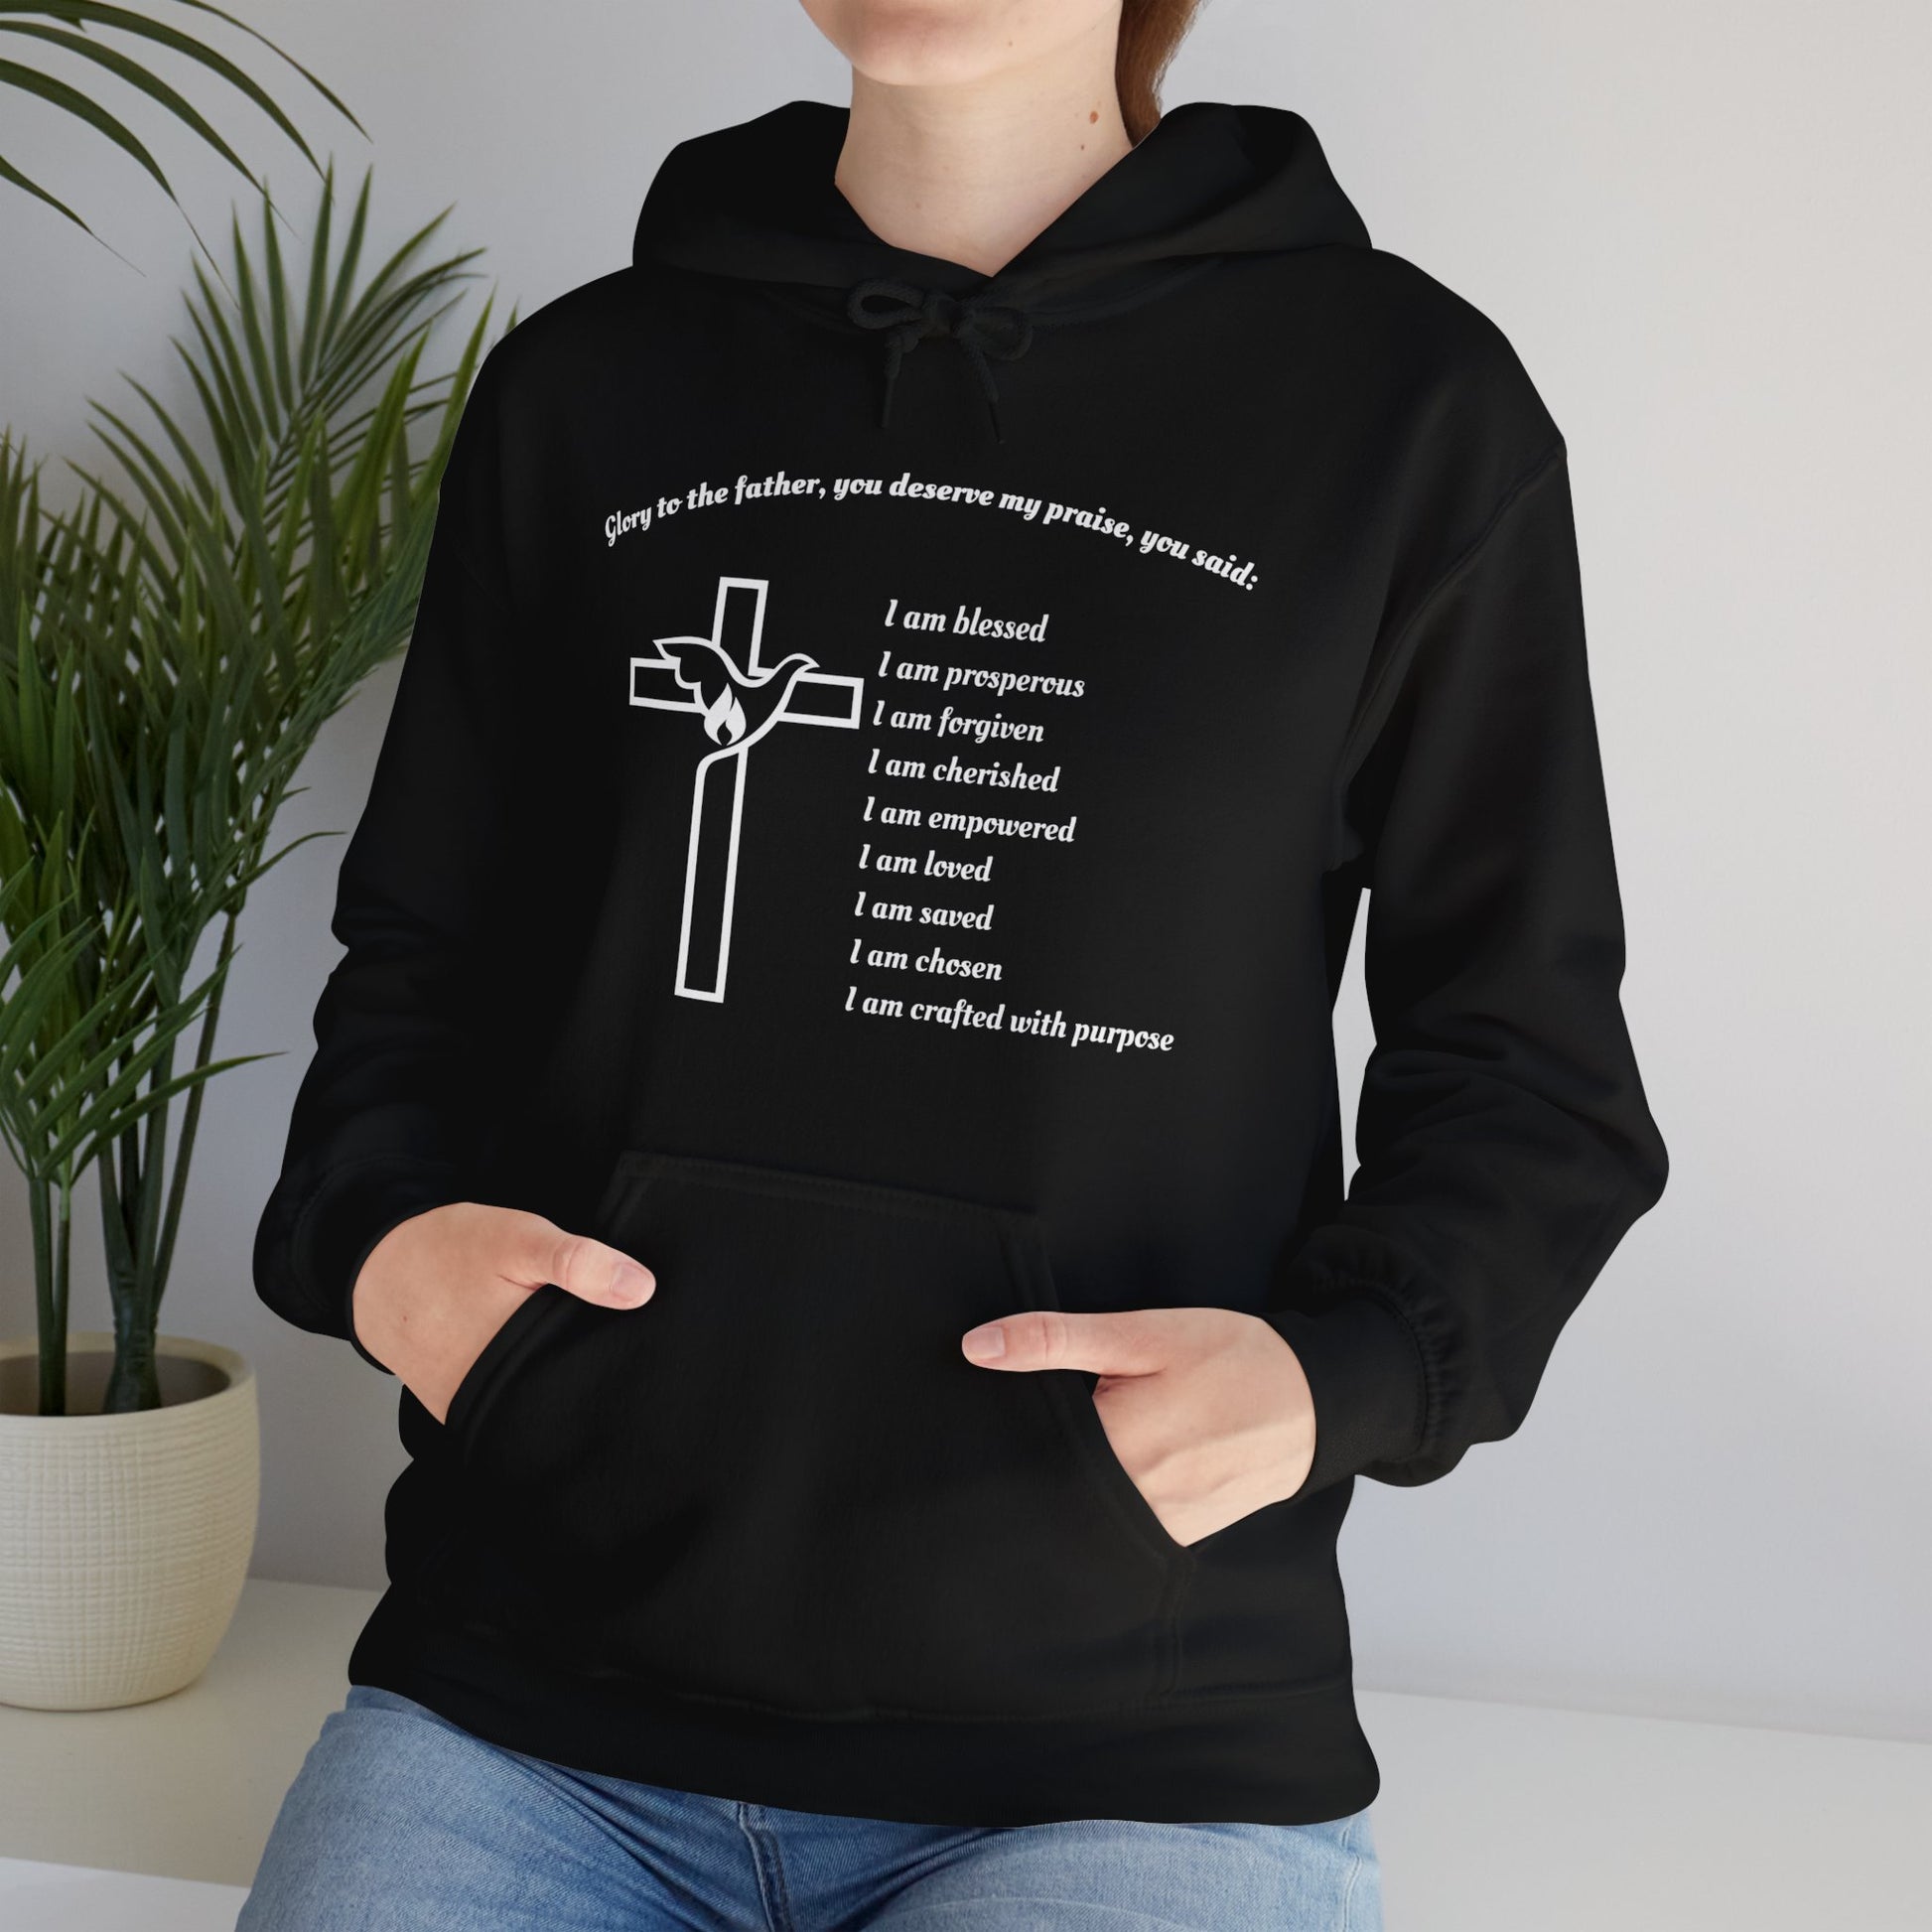 I am Glory to the Father Hooded Sweatshirt Unisex Cozy Heavy Blend42